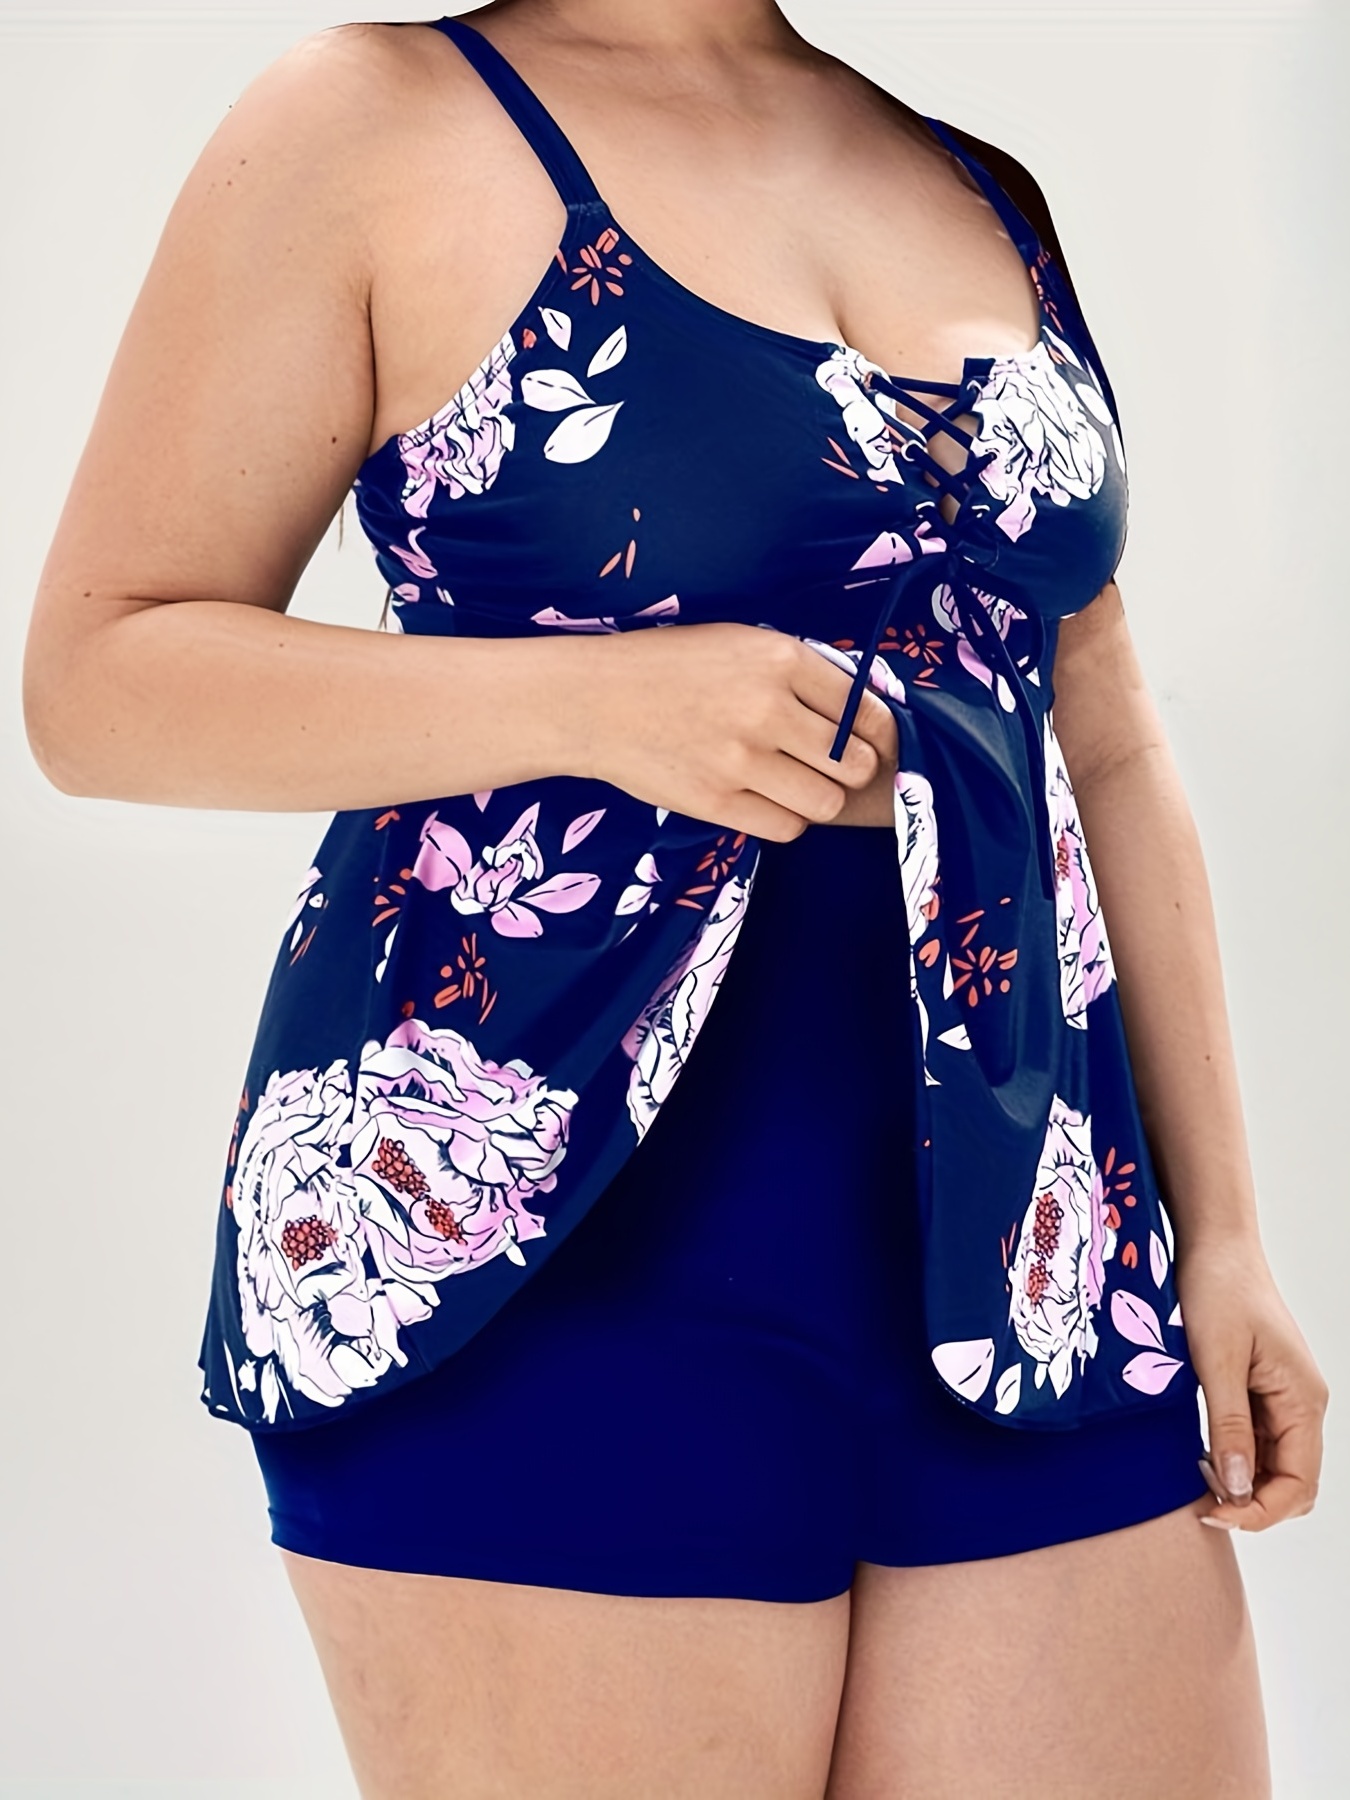 TWO PIECE NAVY FLORAL LACE-UP SHORTS SET